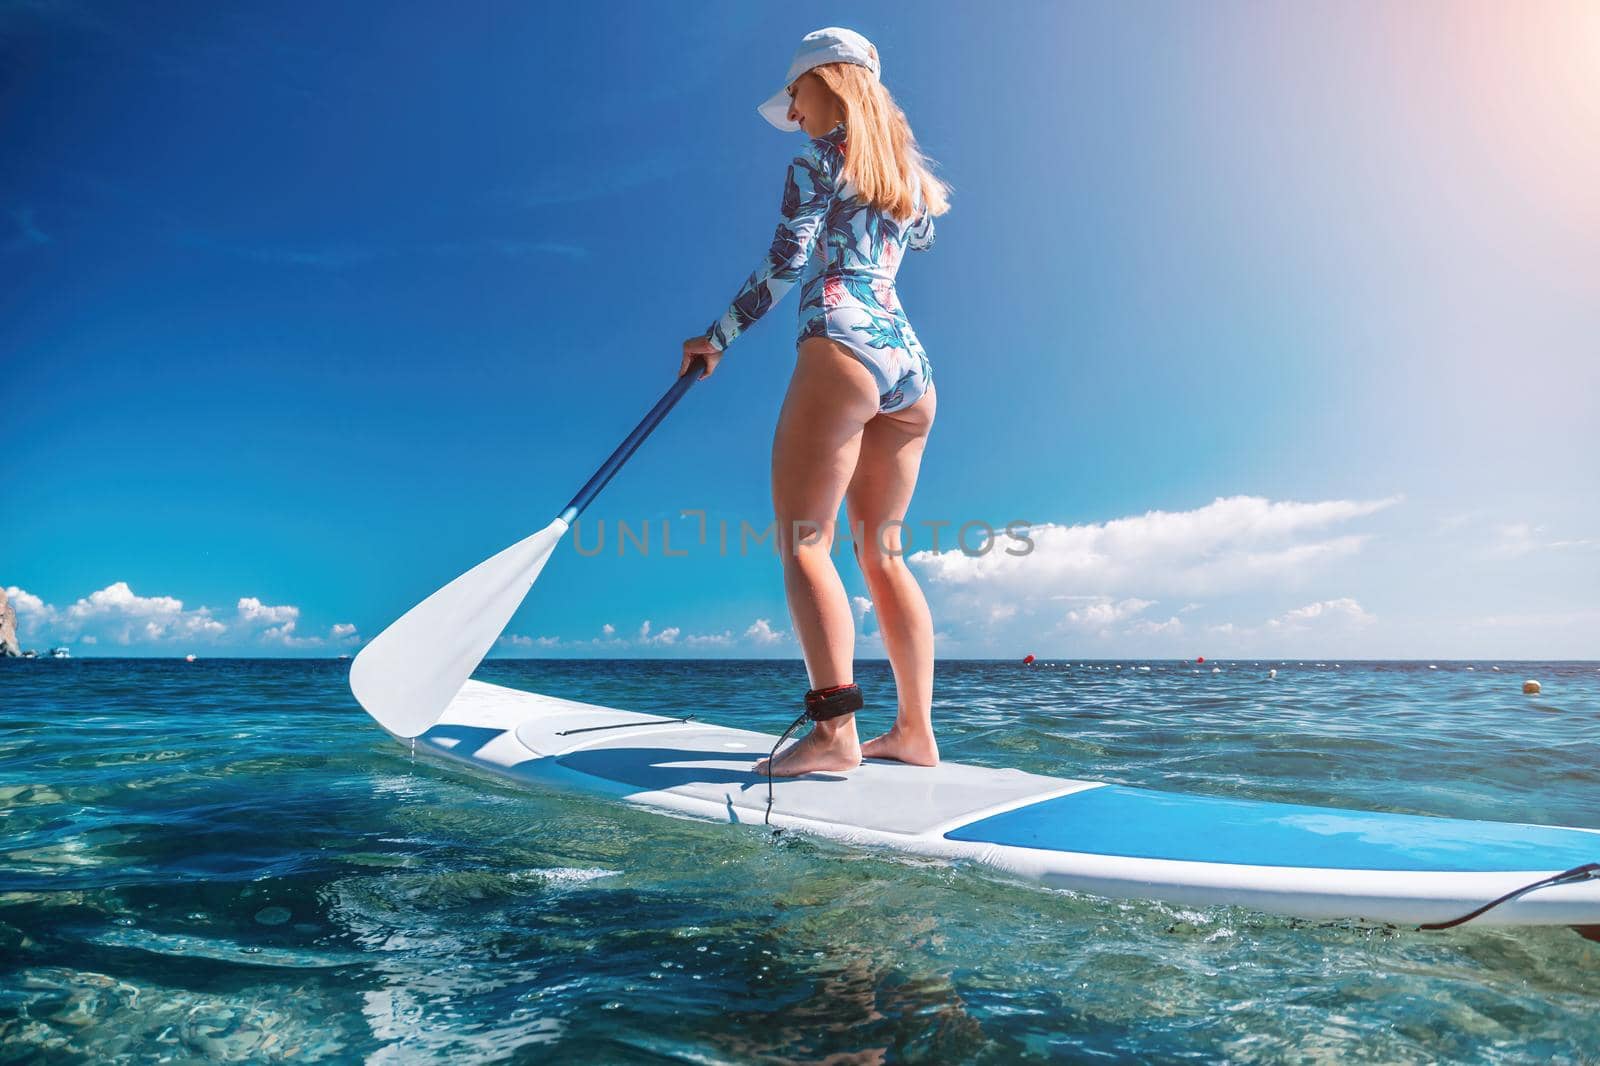 Healthy happy fit woman in bikini relaxing on a sup surfboard, floating on the clear turquoise sea water. Recreational Sports. Stand Up Paddle boarding. Summer fun, holidays travel. Active lifestyle by panophotograph